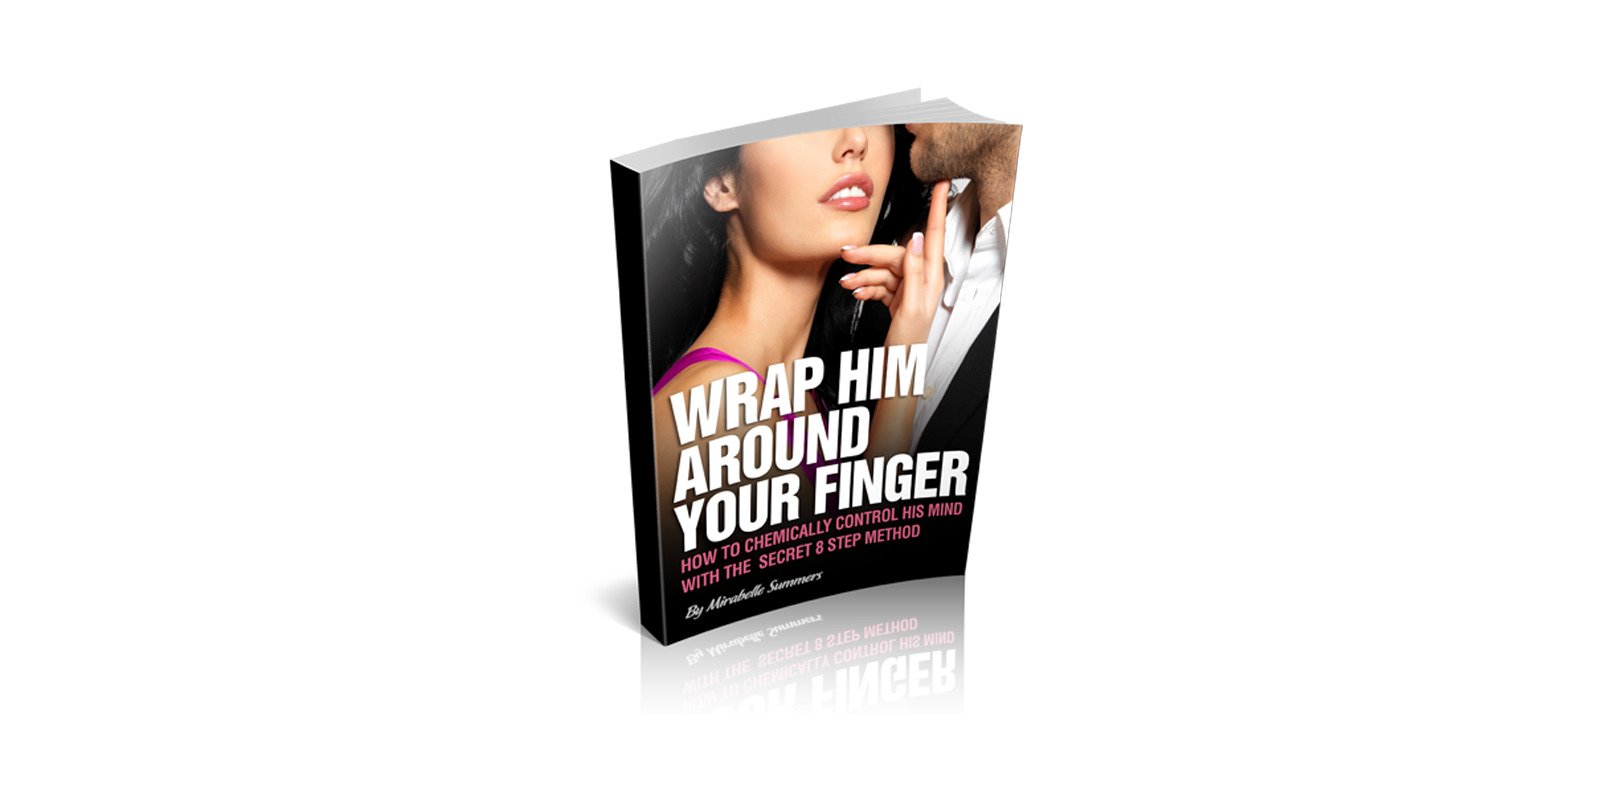 Wrap Him Around Your Finger reviews